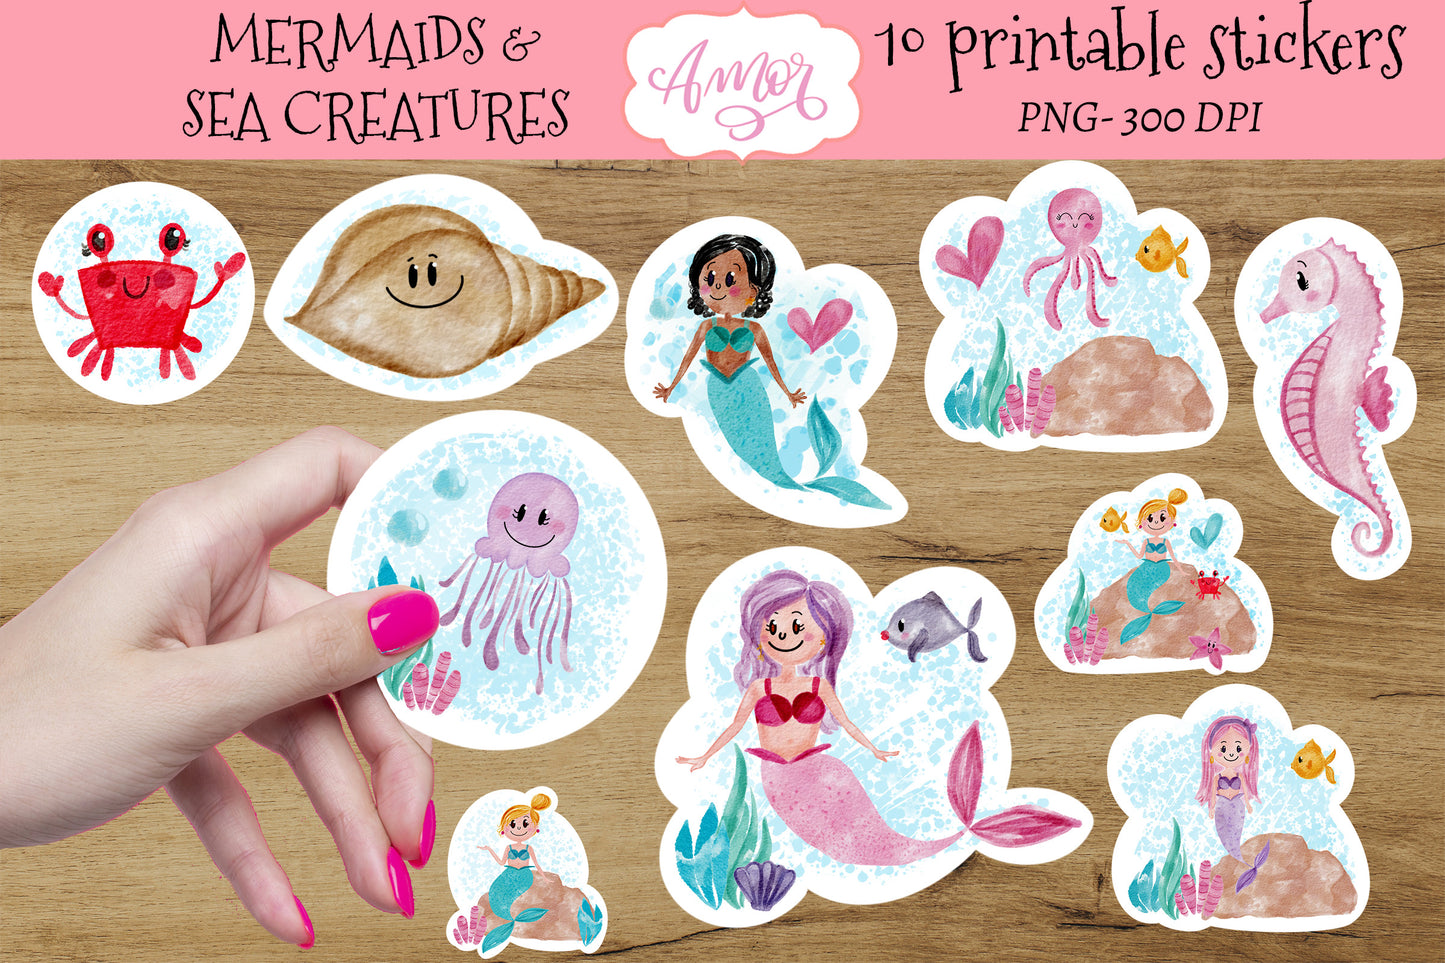 Mermaids and Sea Creatures Stickers for print then cut